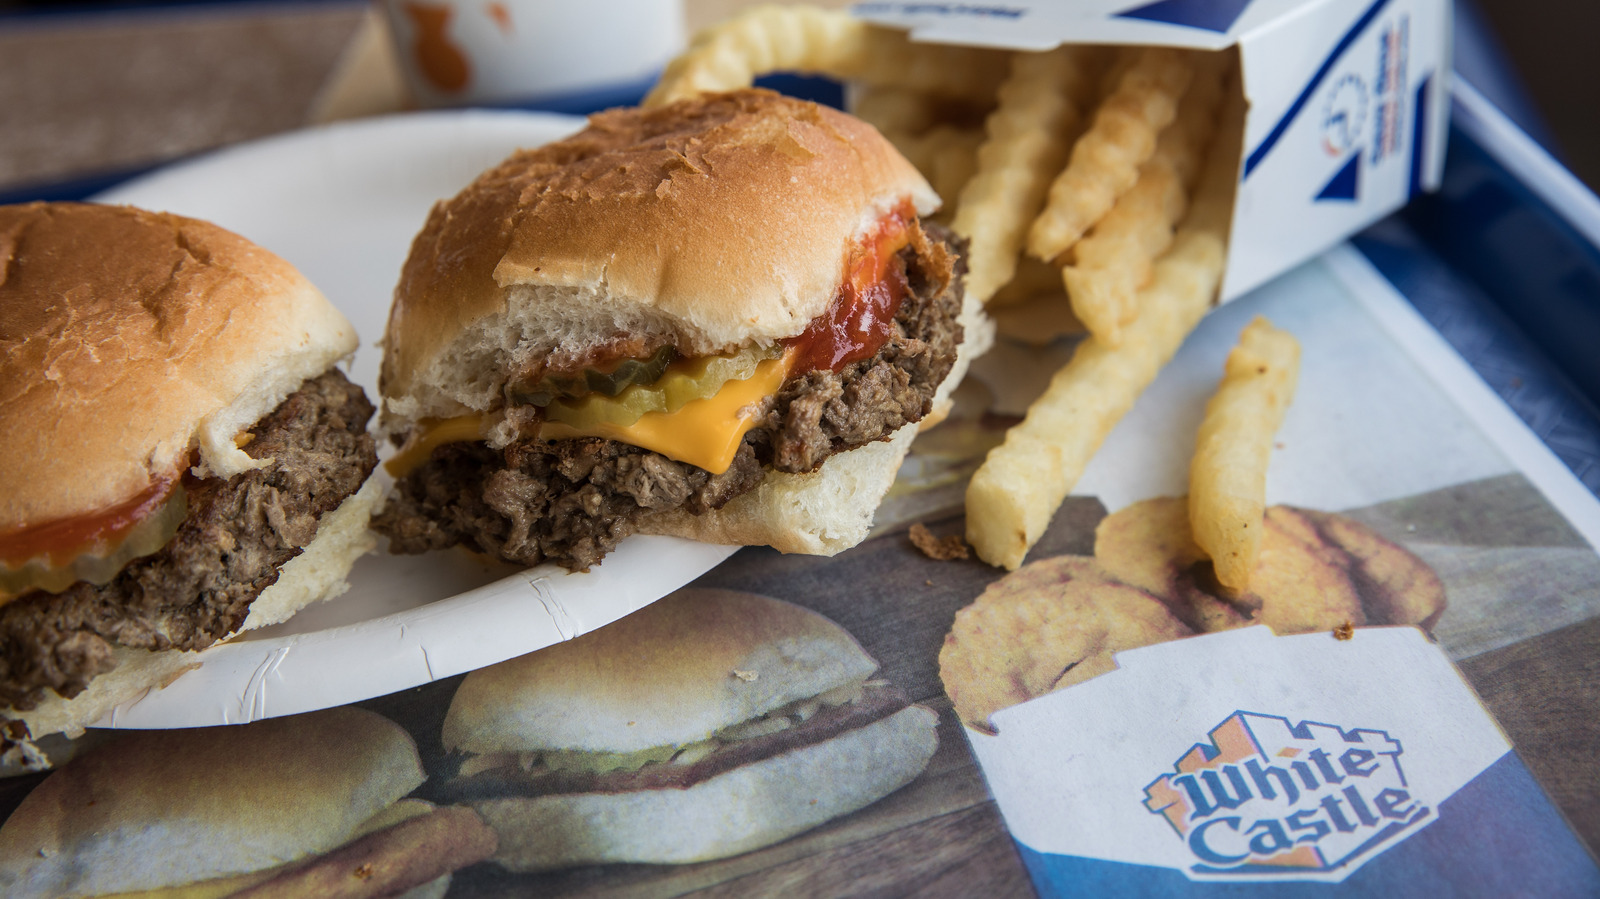 What It Was Really Like To Eat At The First White Castle